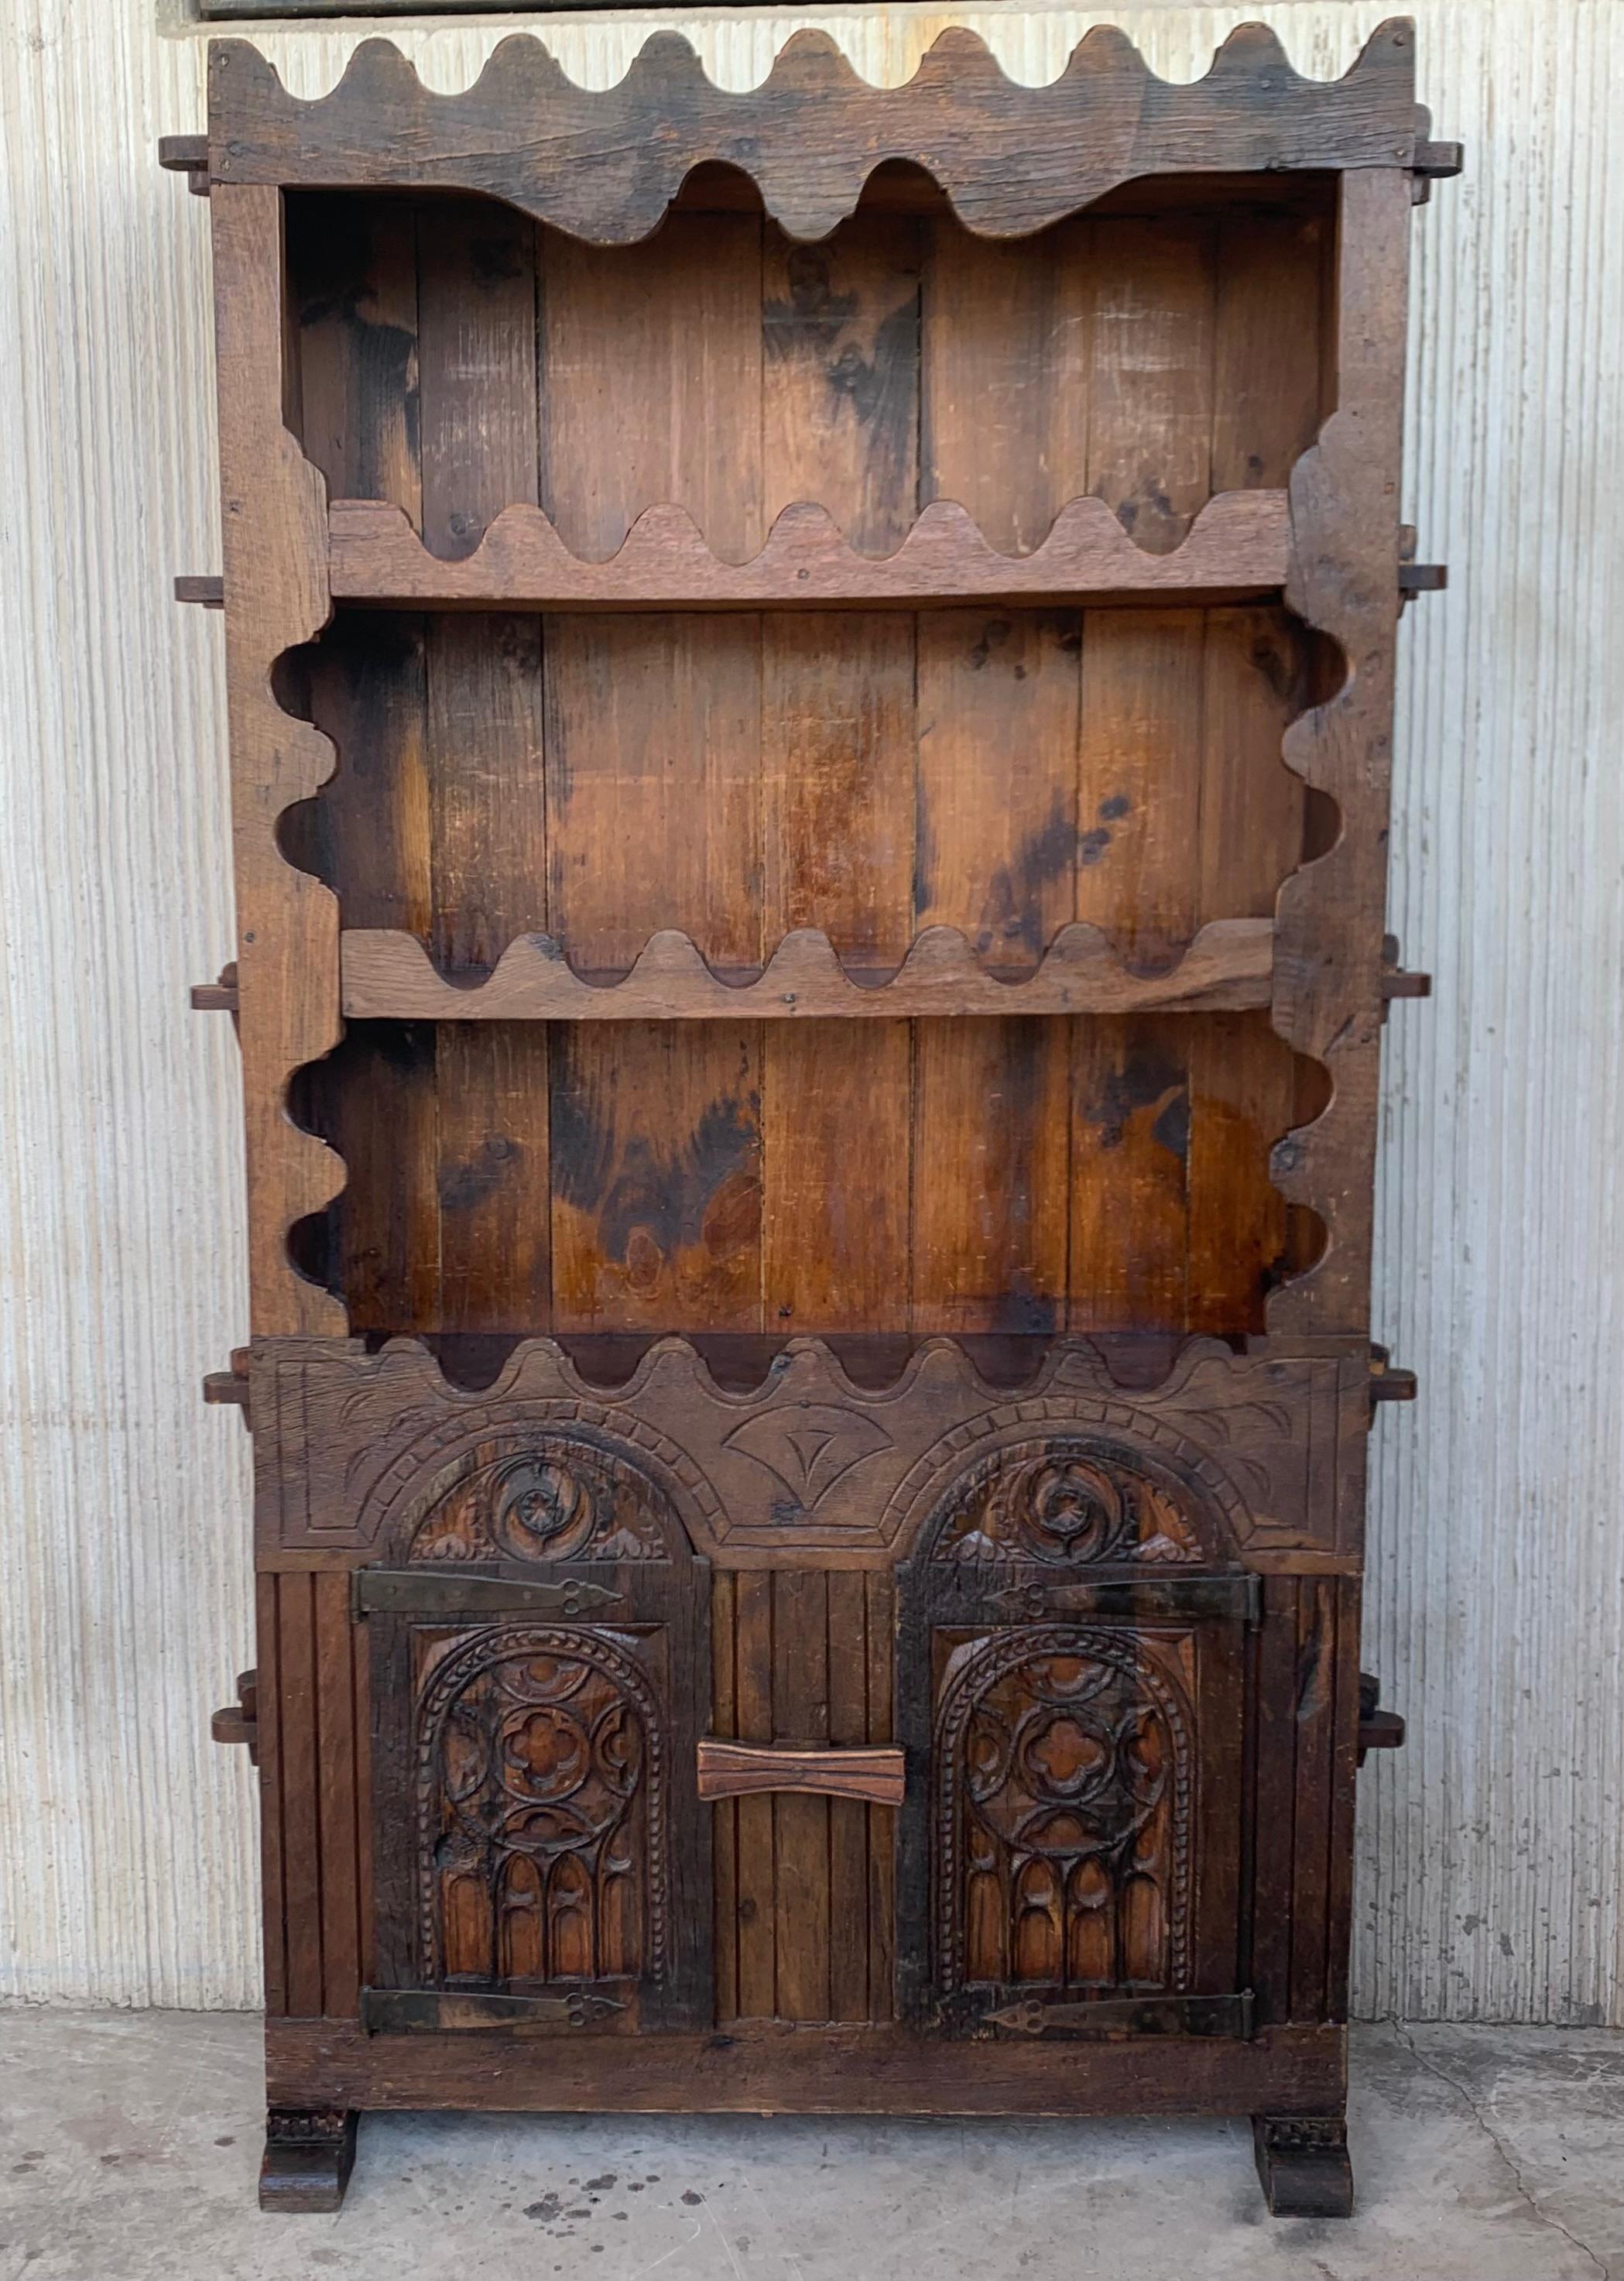 Early 18th century Rustic Spanish open bookcase is a relic from the distant past, ready to serve your family for generations yet to come! Hand-hewn from old-growth timbers of solid oak, it was produced using time-honored techniques of full mortise &